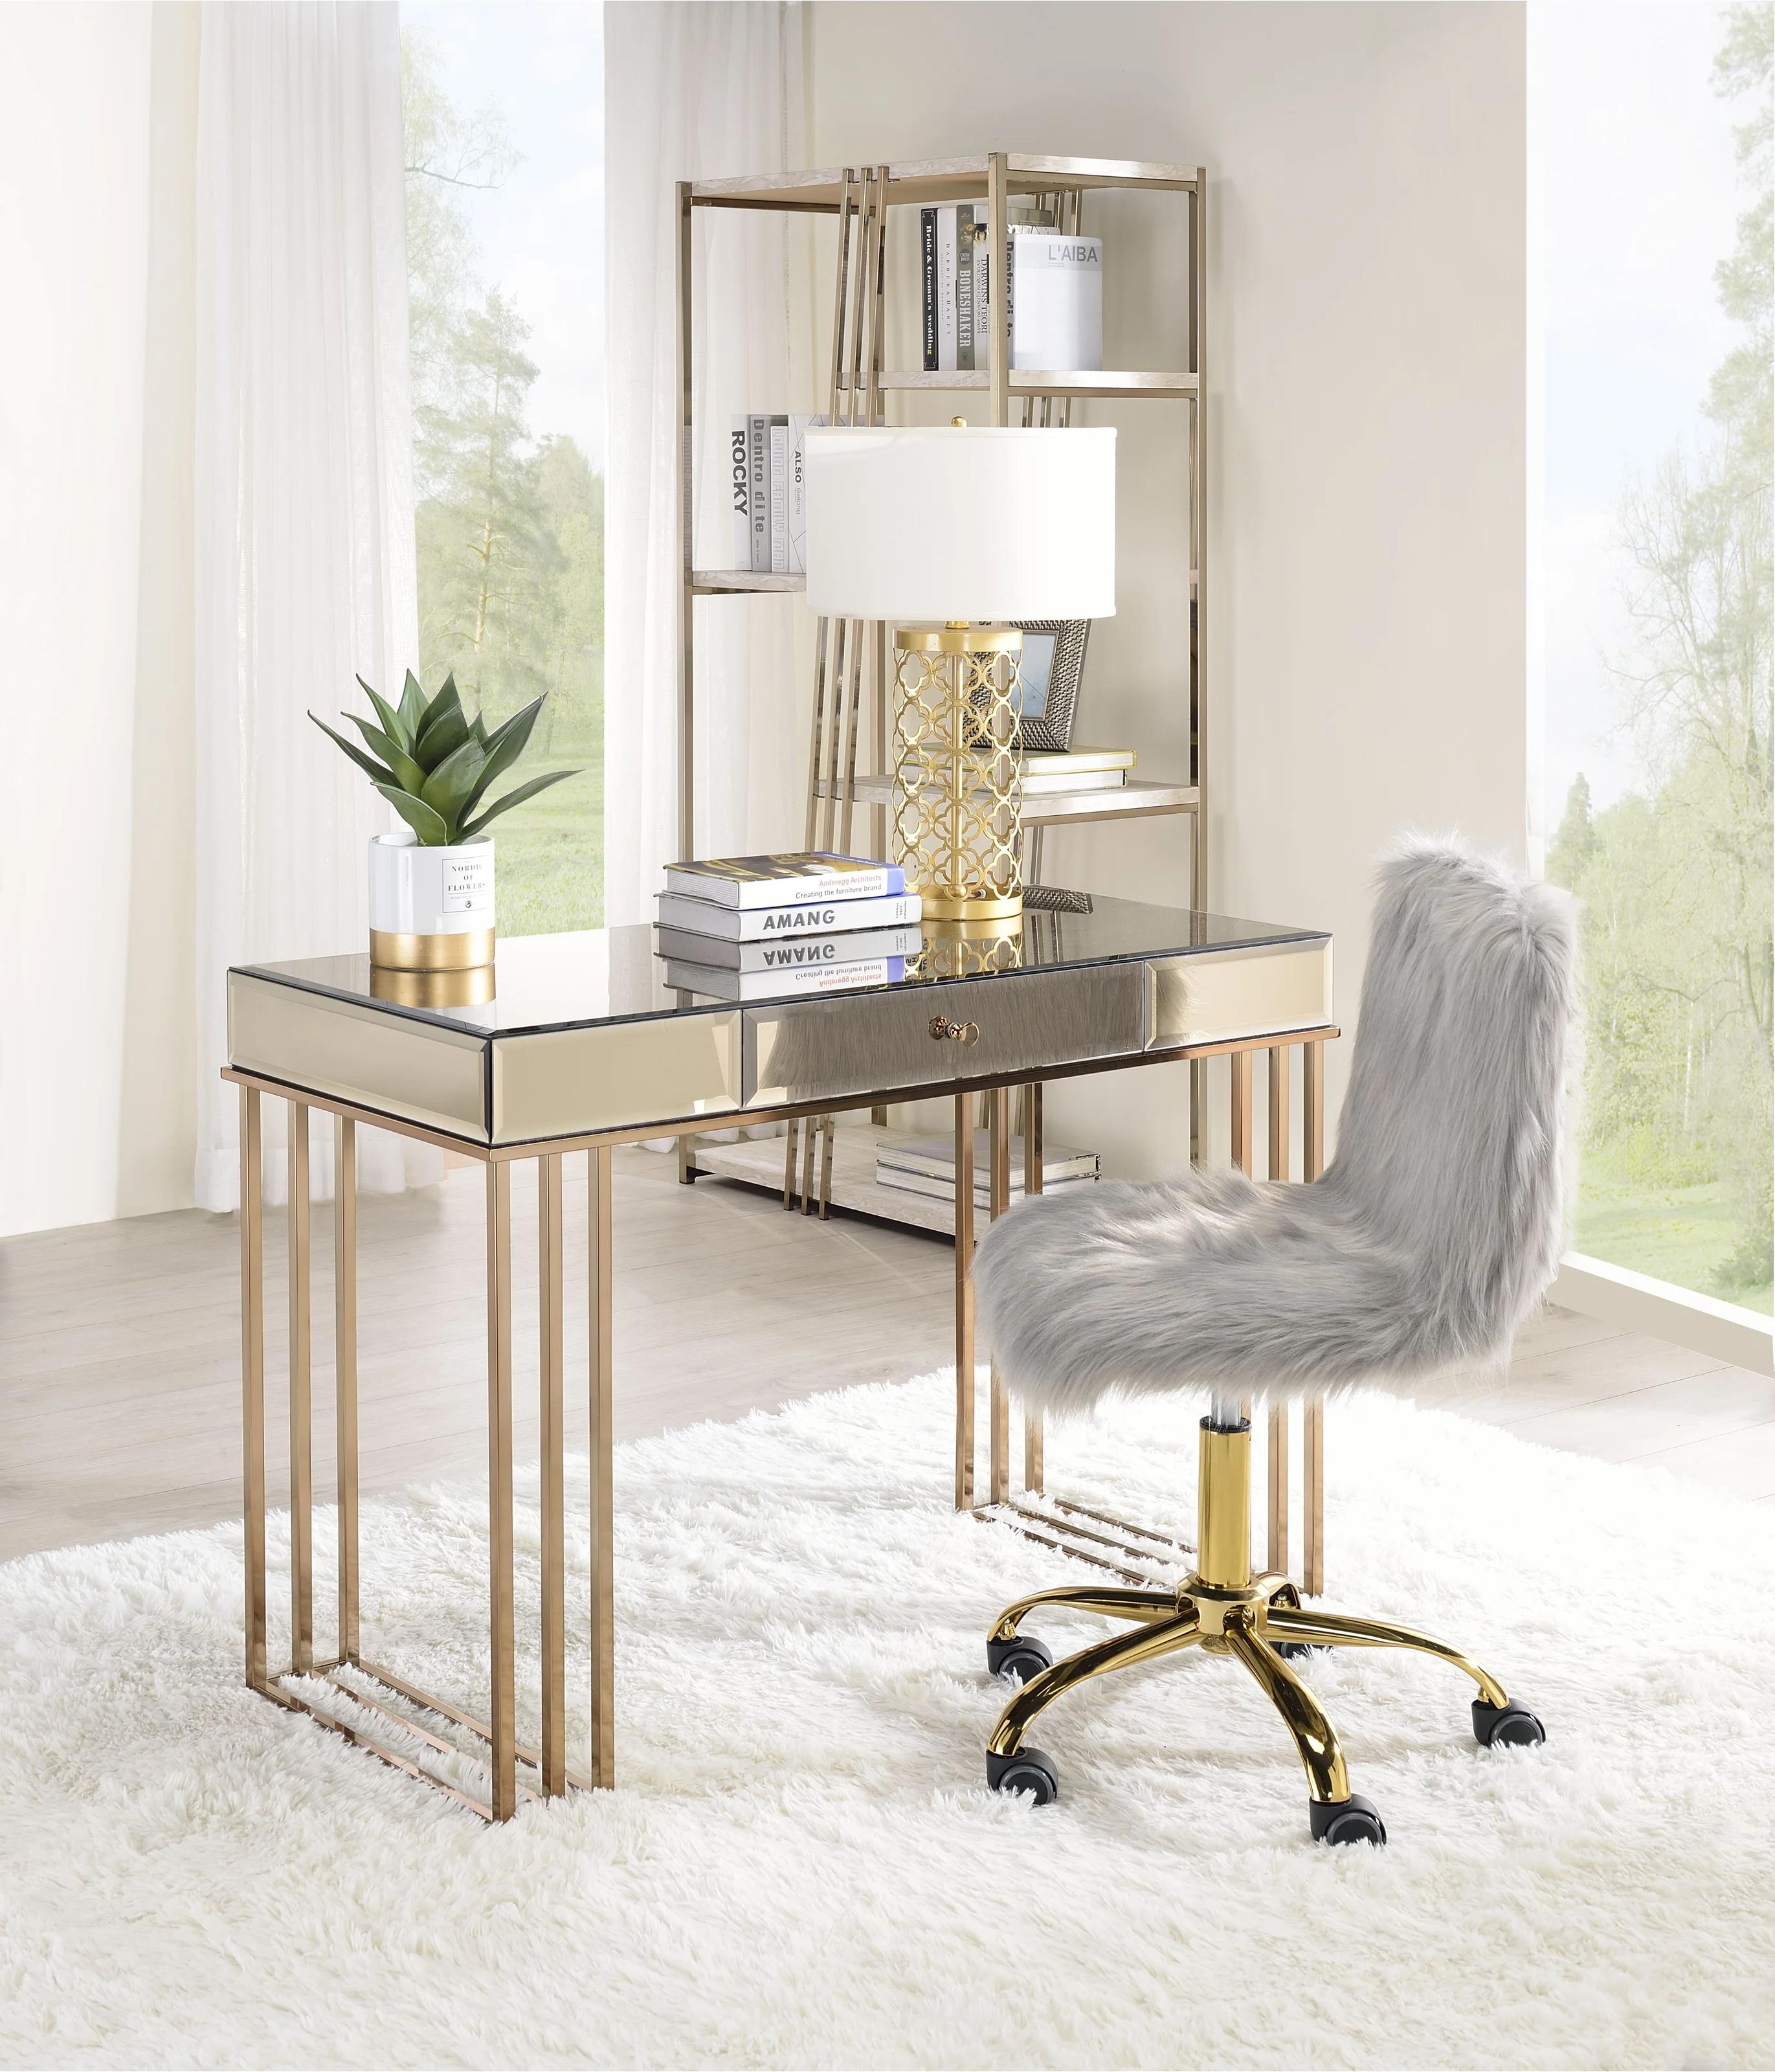 Modern Home Office Set Critter 92981-3pcs in Champagne Fur